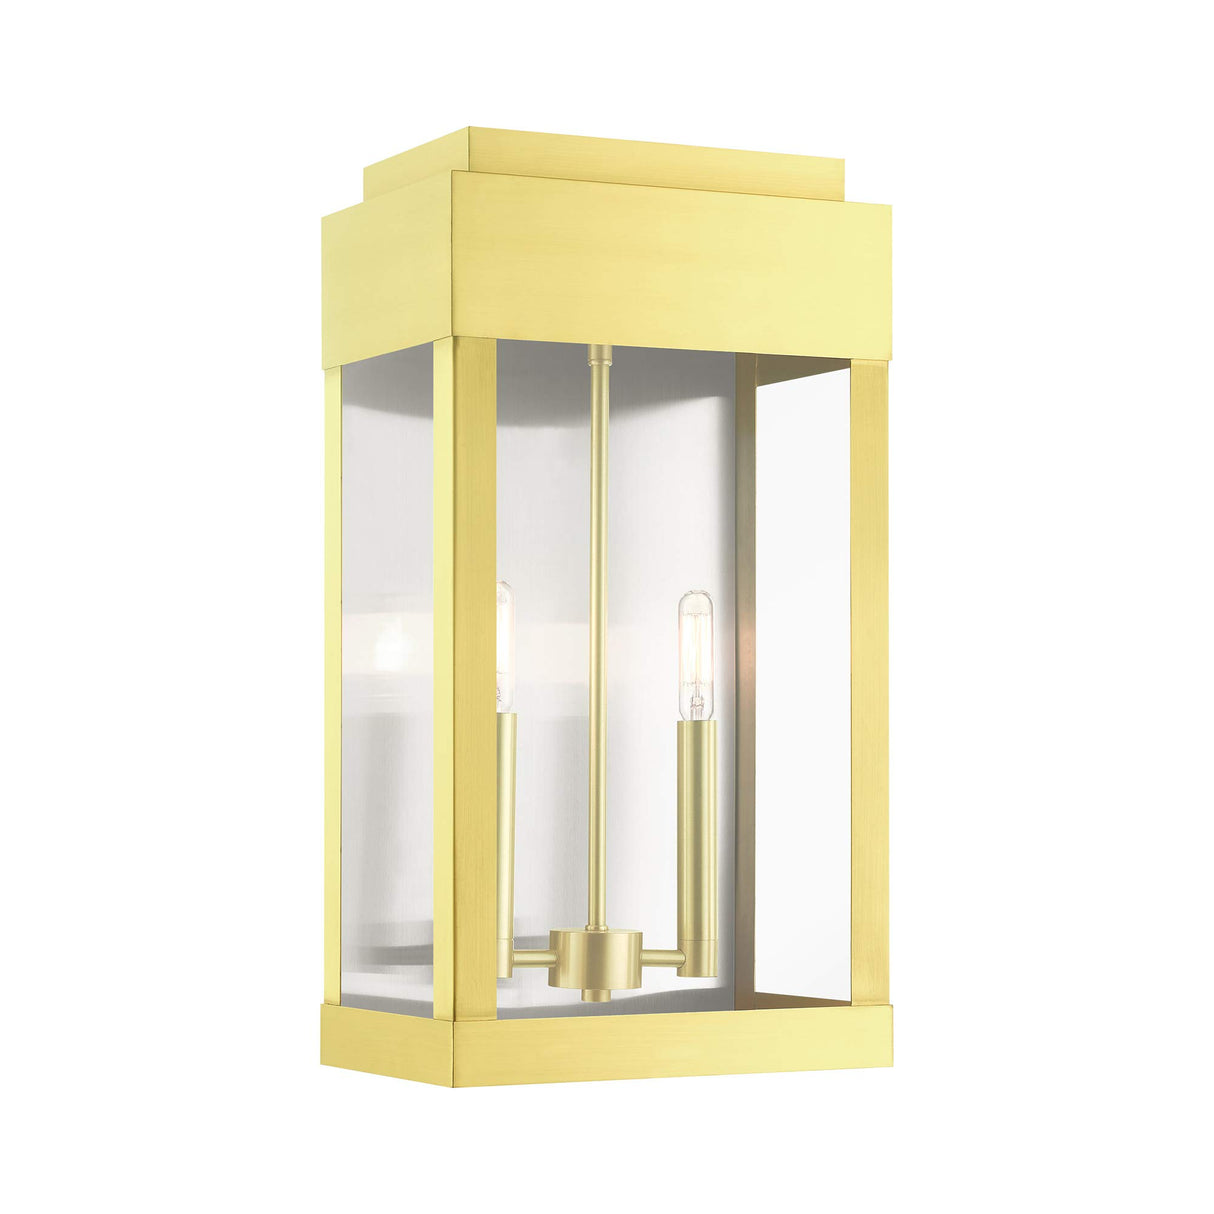 Livex Lighting 21238-12 York 2 Light Outdoor Wall Lantern, Satin Brass with Brushed Nickel Stainless Steel Reflector